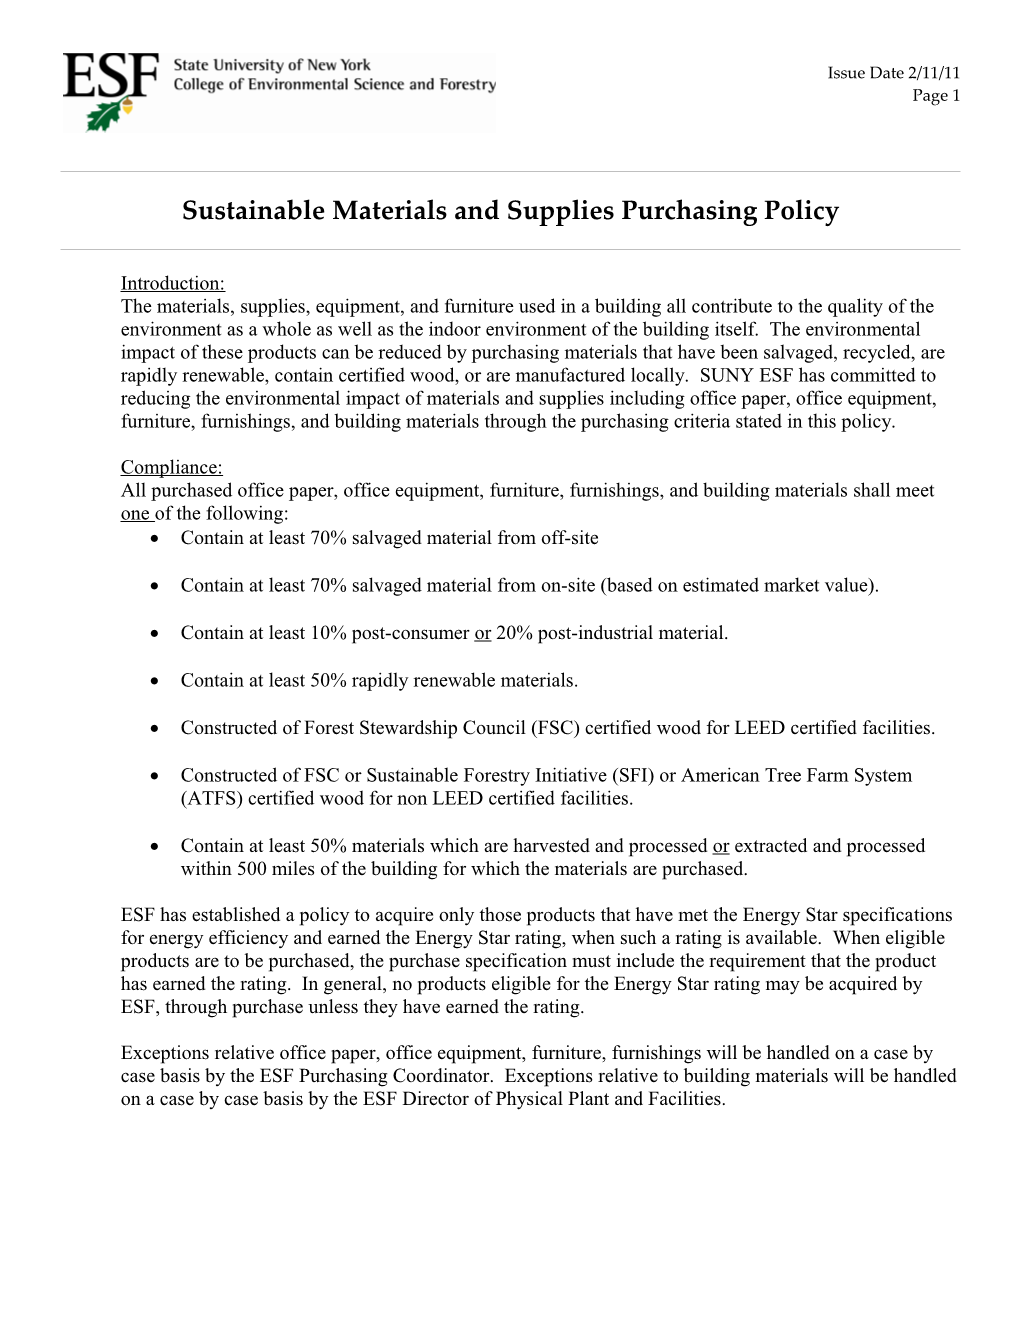 Sustainable Materials and Supplies Purchasing Policy